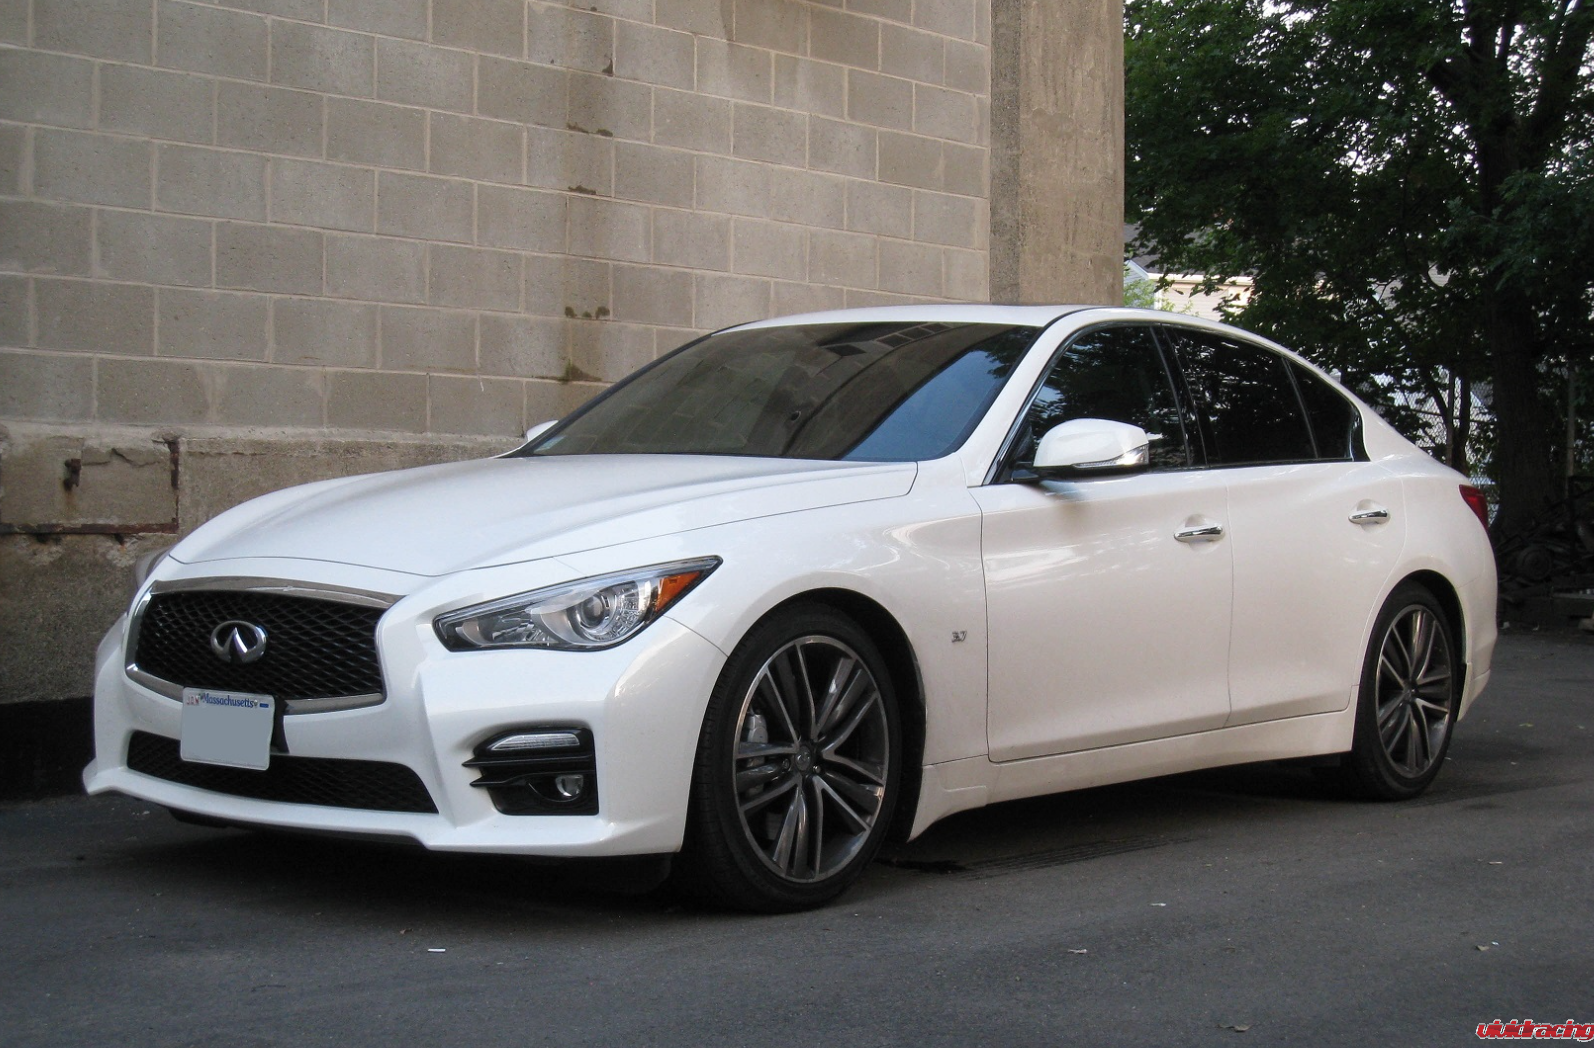 Tanabe, lowering springs, NF210, Infiniti Q50 Red Sport 400 AWD